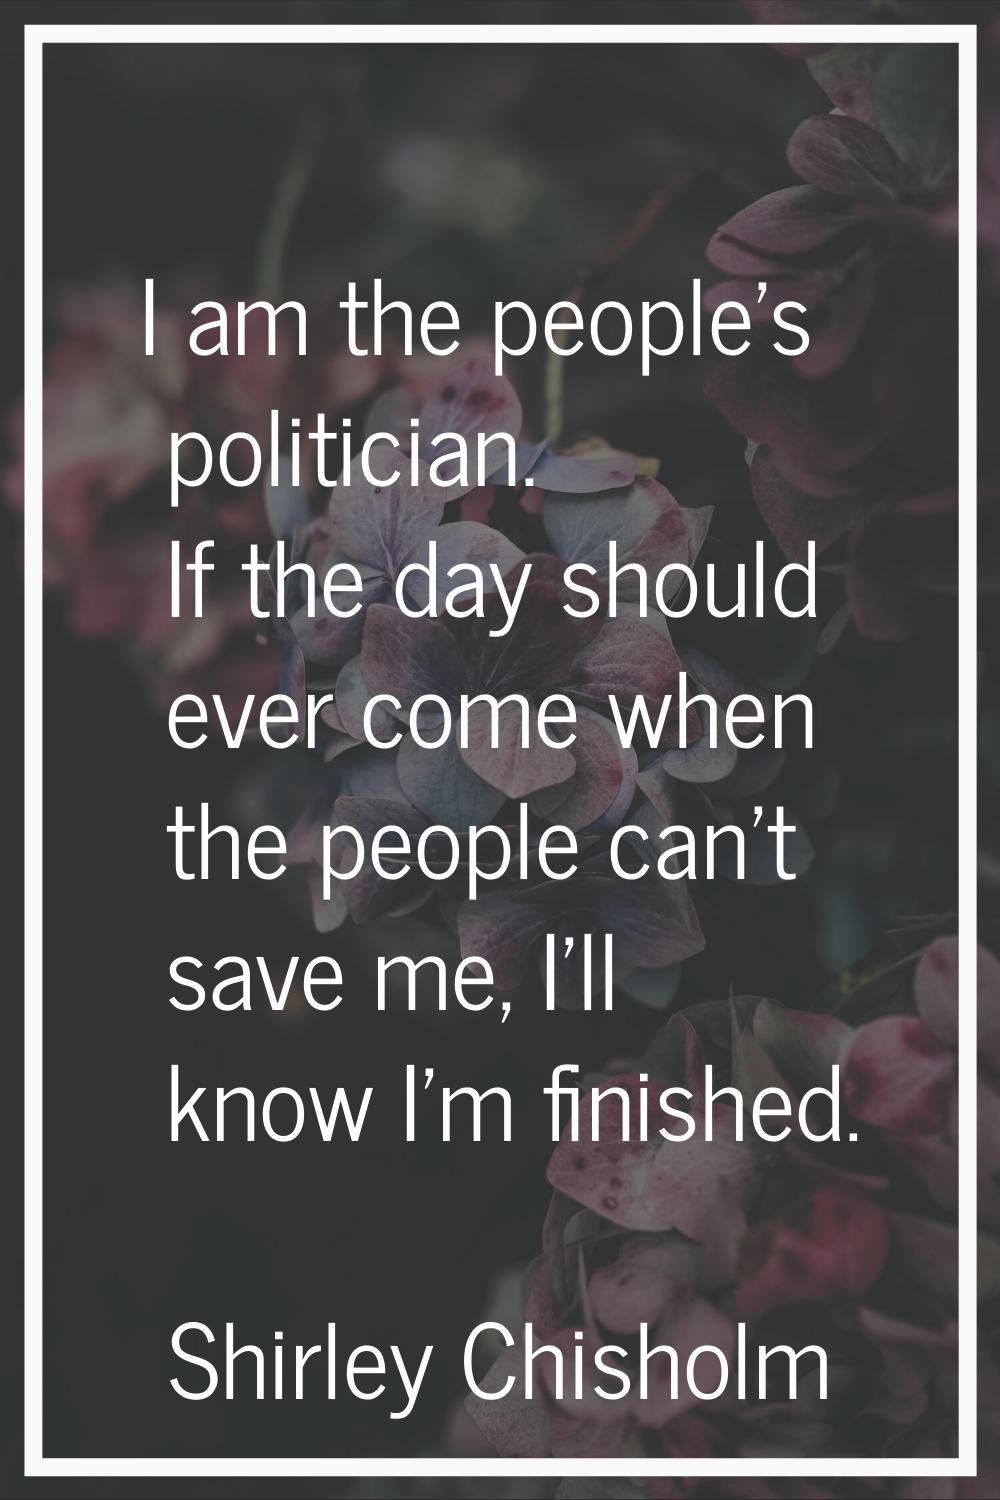 I am the people's politician. If the day should ever come when the people can't save me, I'll know 